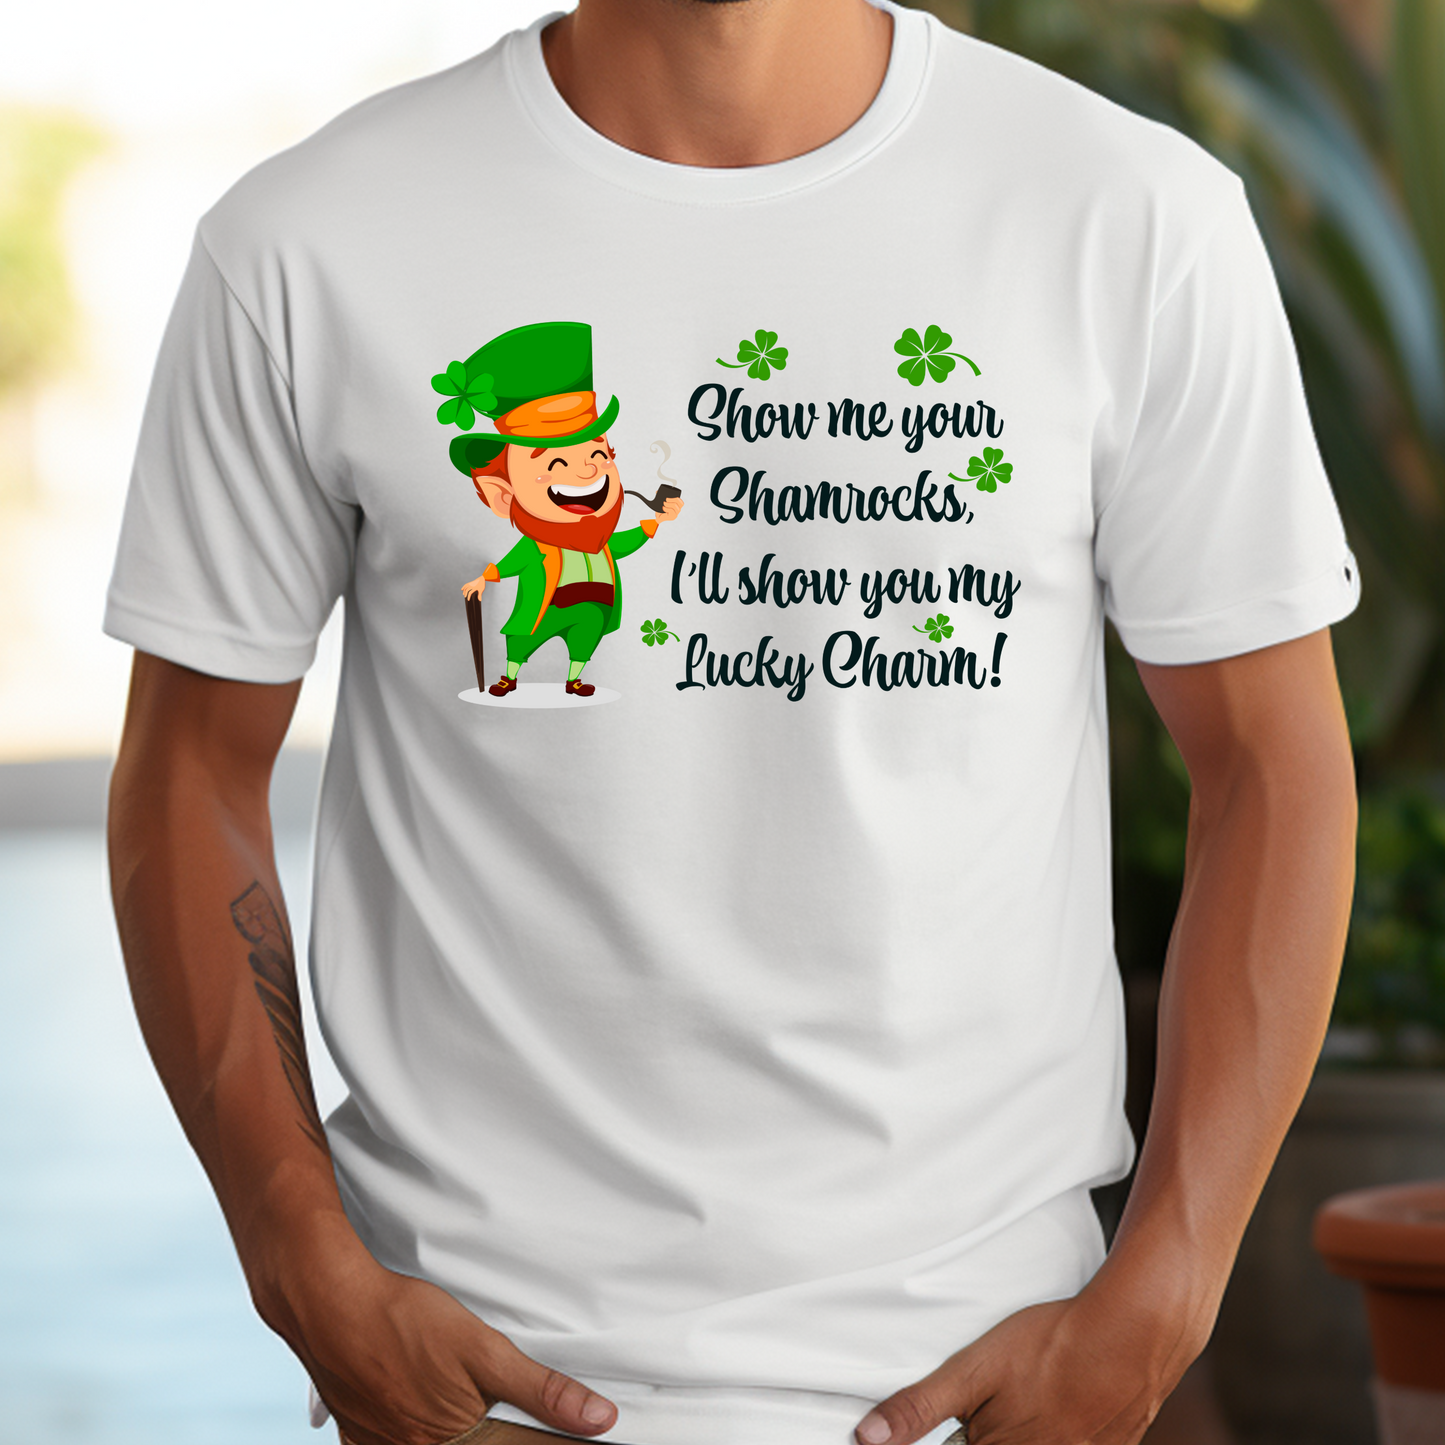 Show Me Your Shamrocks T-Shirt For St. Paddy Day T Shirt For St. Patricks Day TShirt